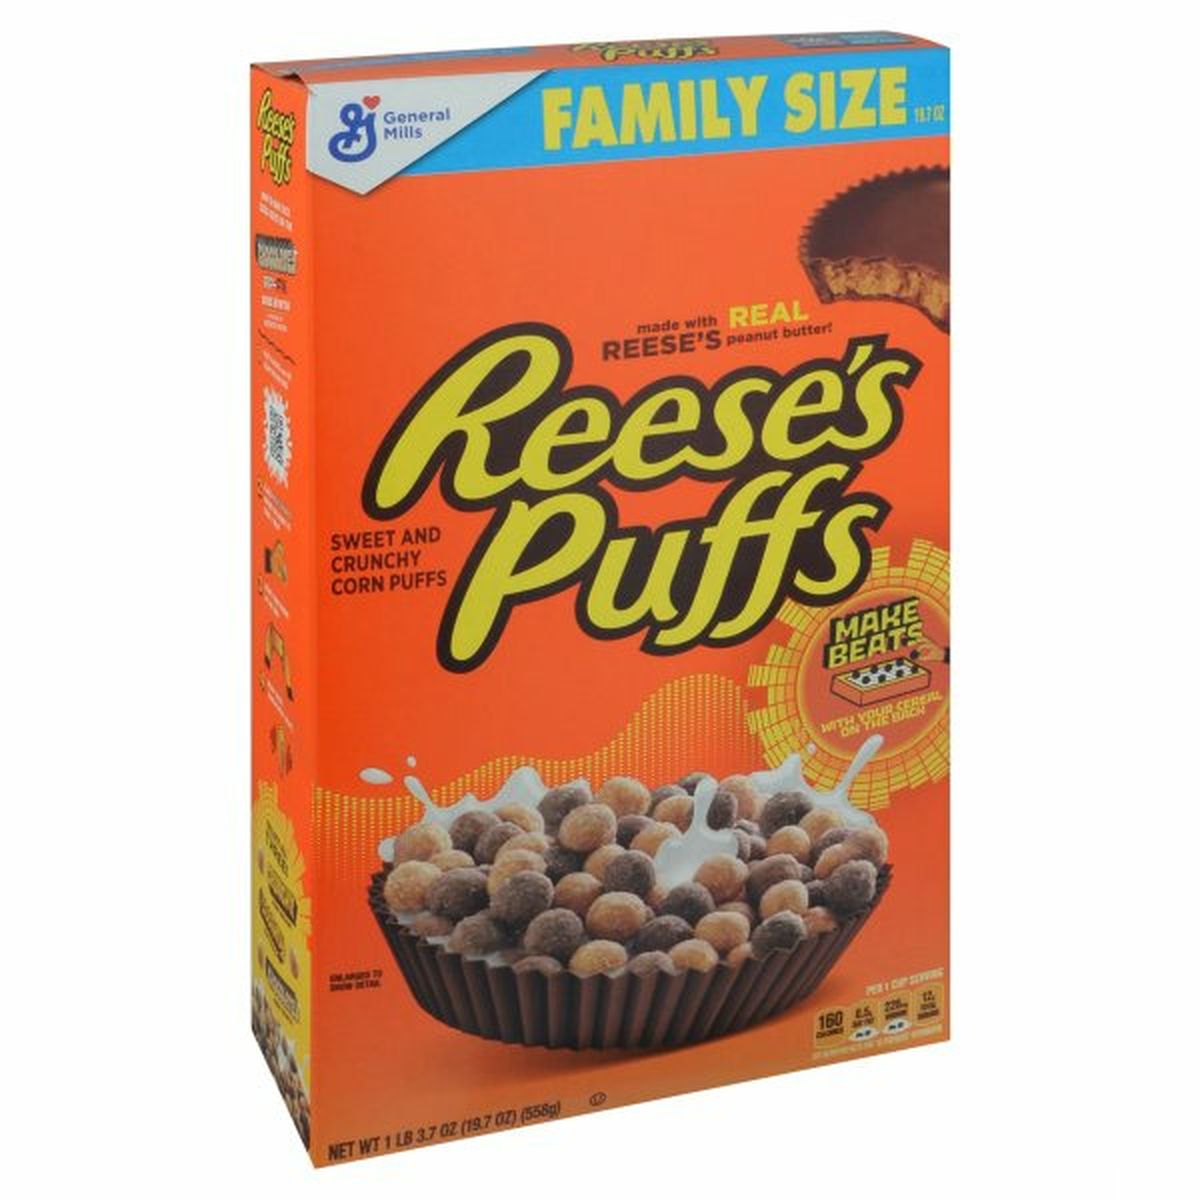 Calories in Reese's Puffs Puffs, Family Size